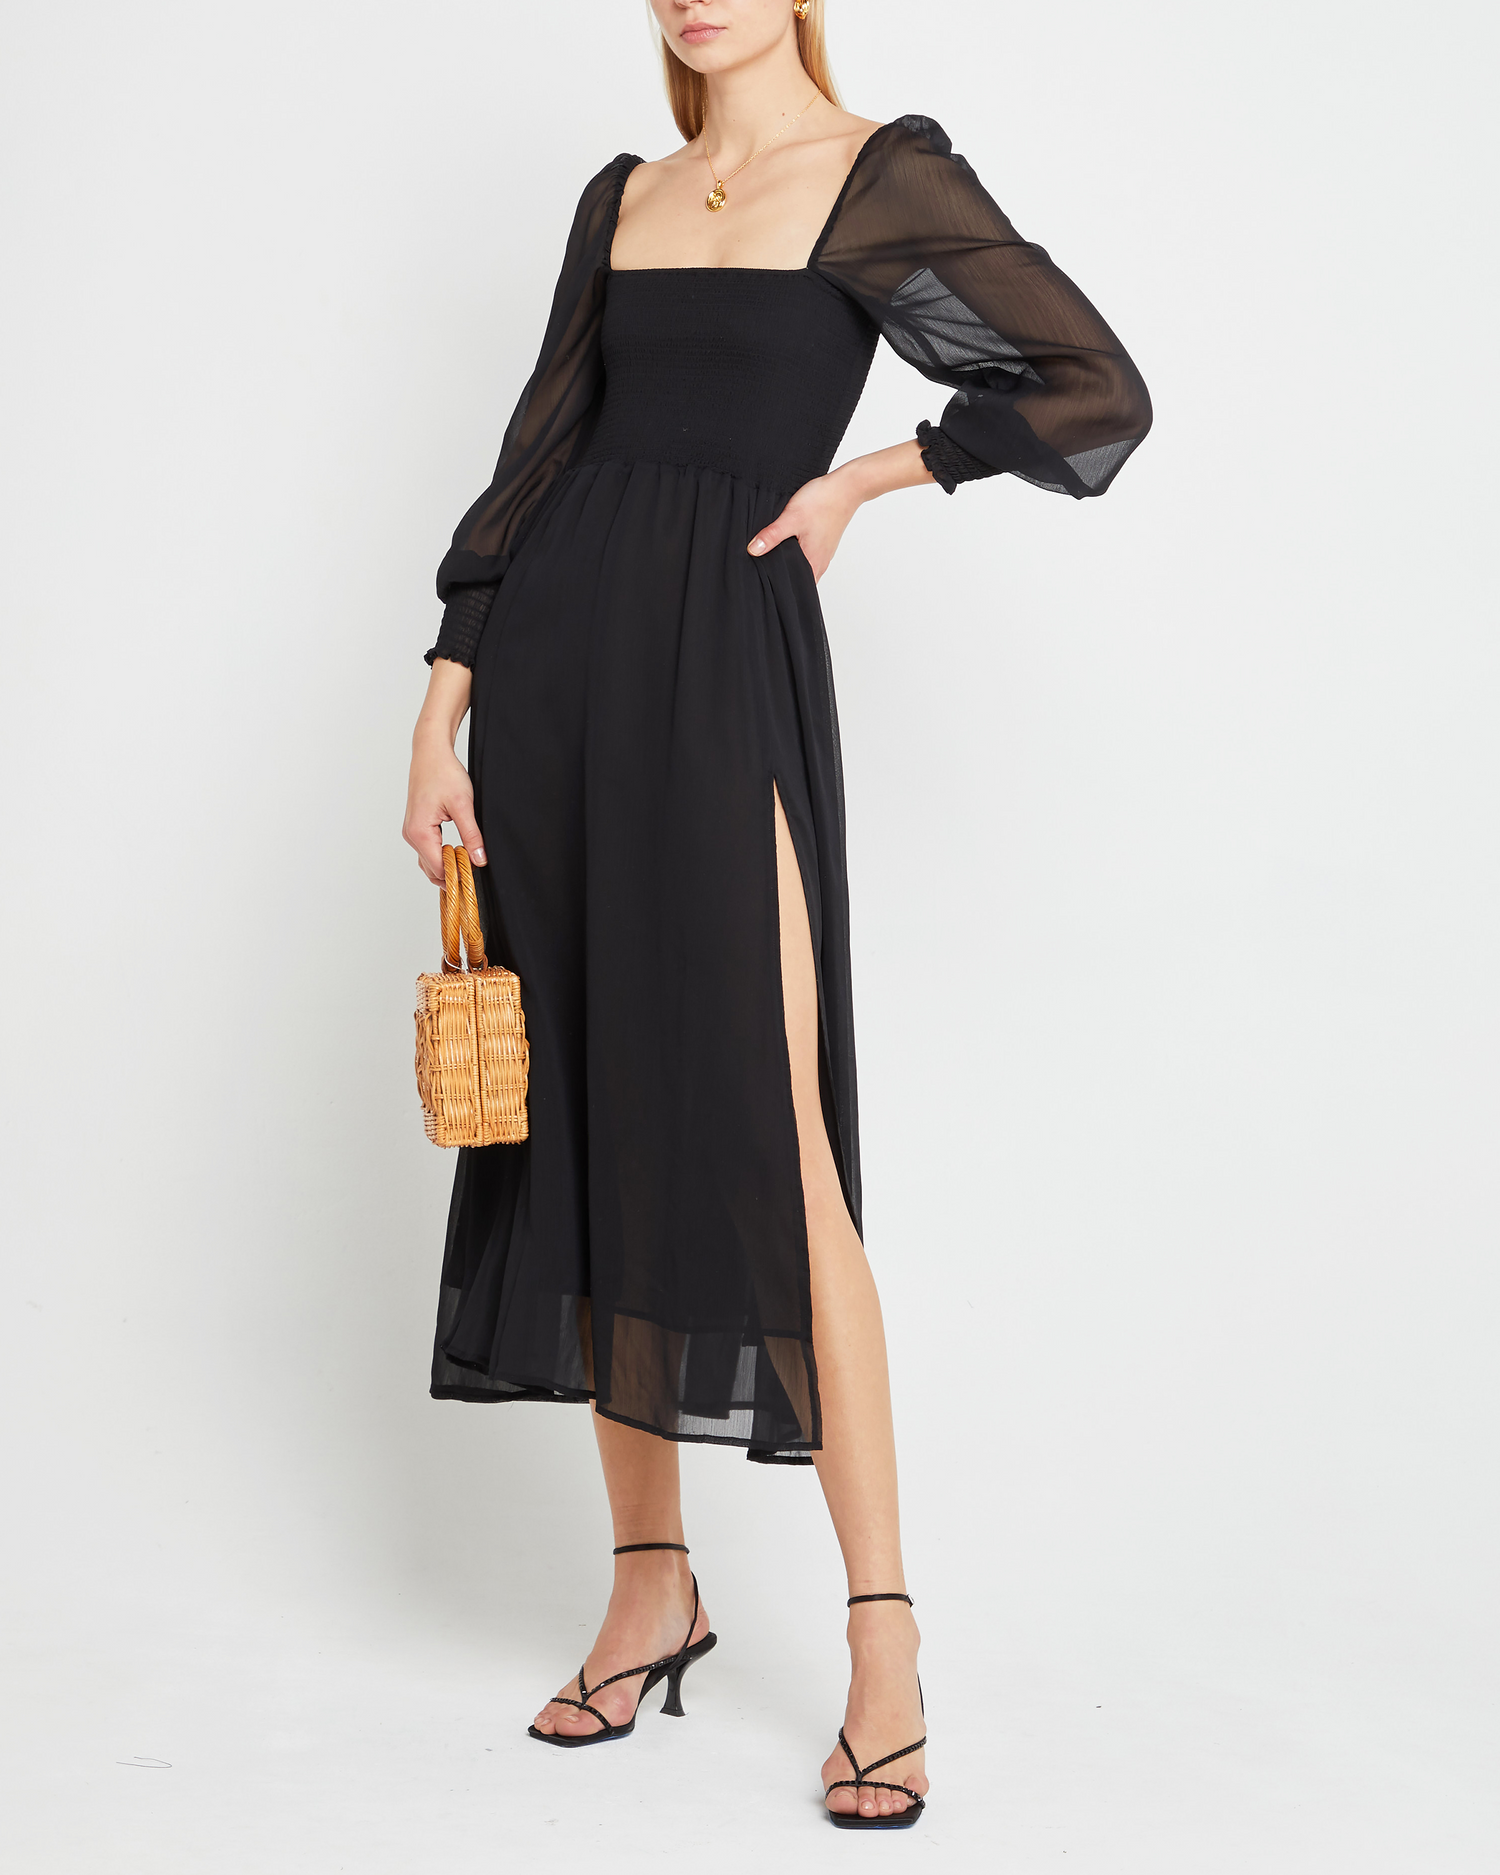 First image of Classic Smocked Maxi Dress, a black maxi dress, side slit, long, sheer sleeves, puff sleeves, suqare neckline, smocke bodice